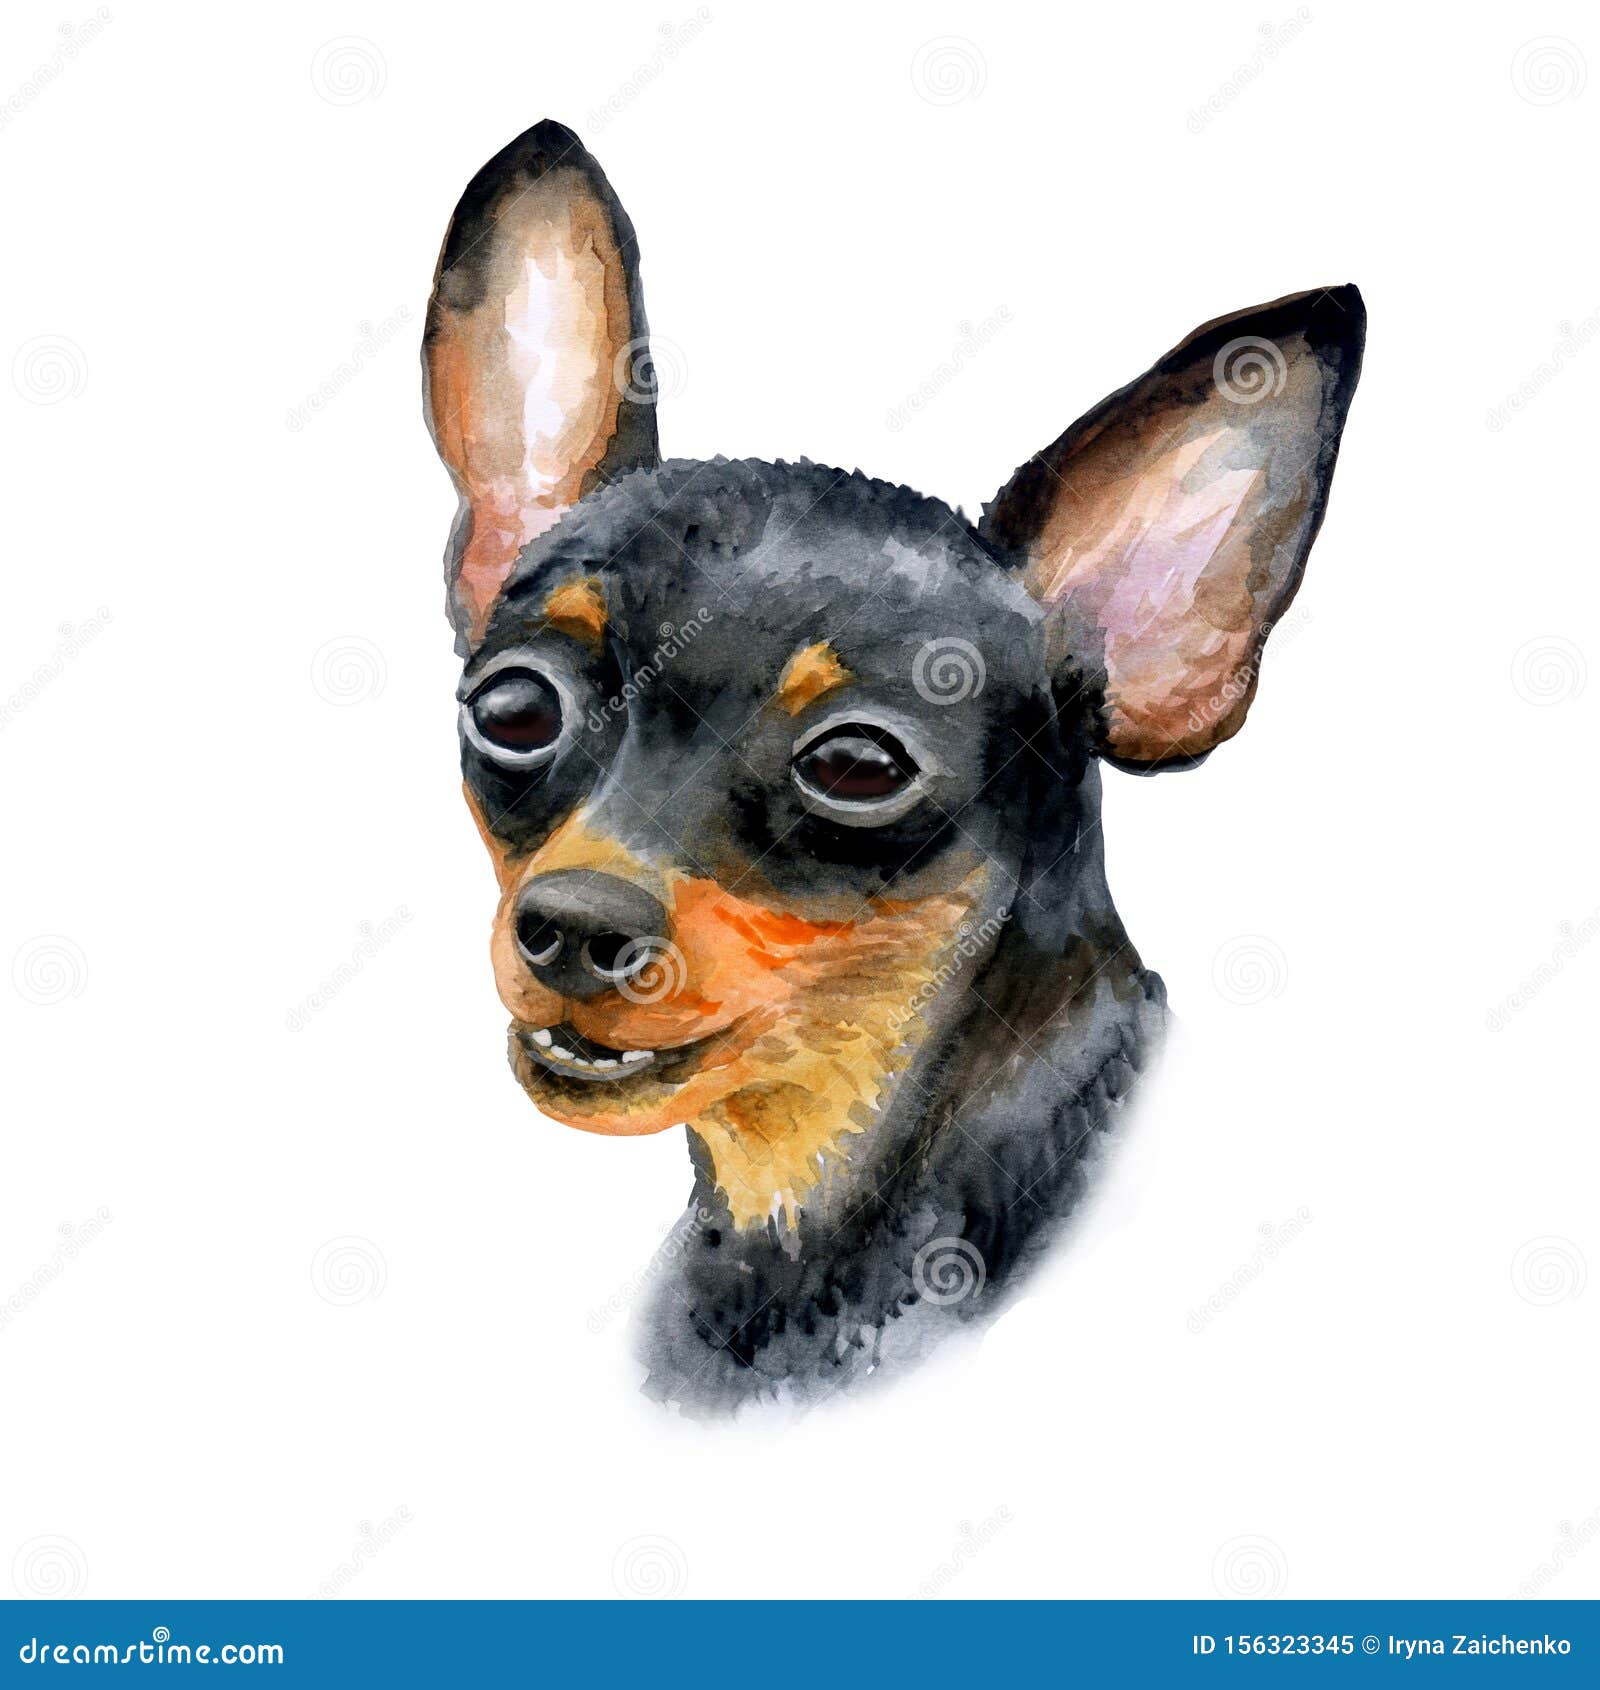 Watercolor Closeup Portrait Of Cute Prague Ratter Or Prazsky Krysarik Breed Dog Isolated On White Background Shorthair Small Stock Illustration Illustration Of Club Isolated 156323345